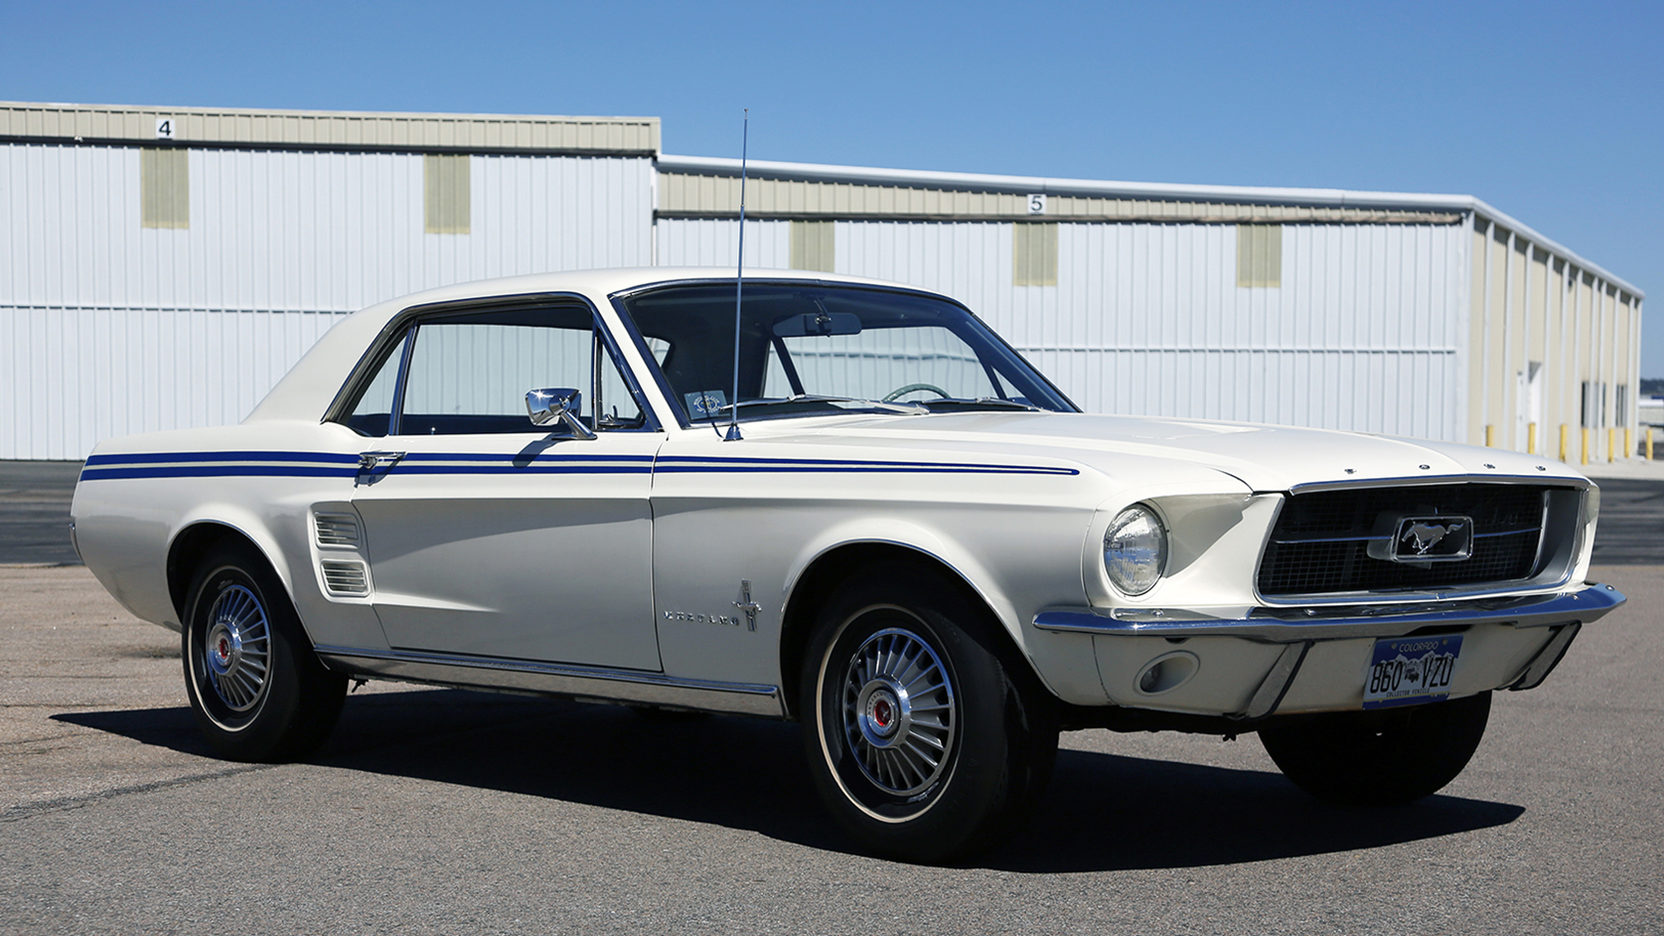 Mustang Of The Day: 1967 Mustang Indy Pacesetter Special